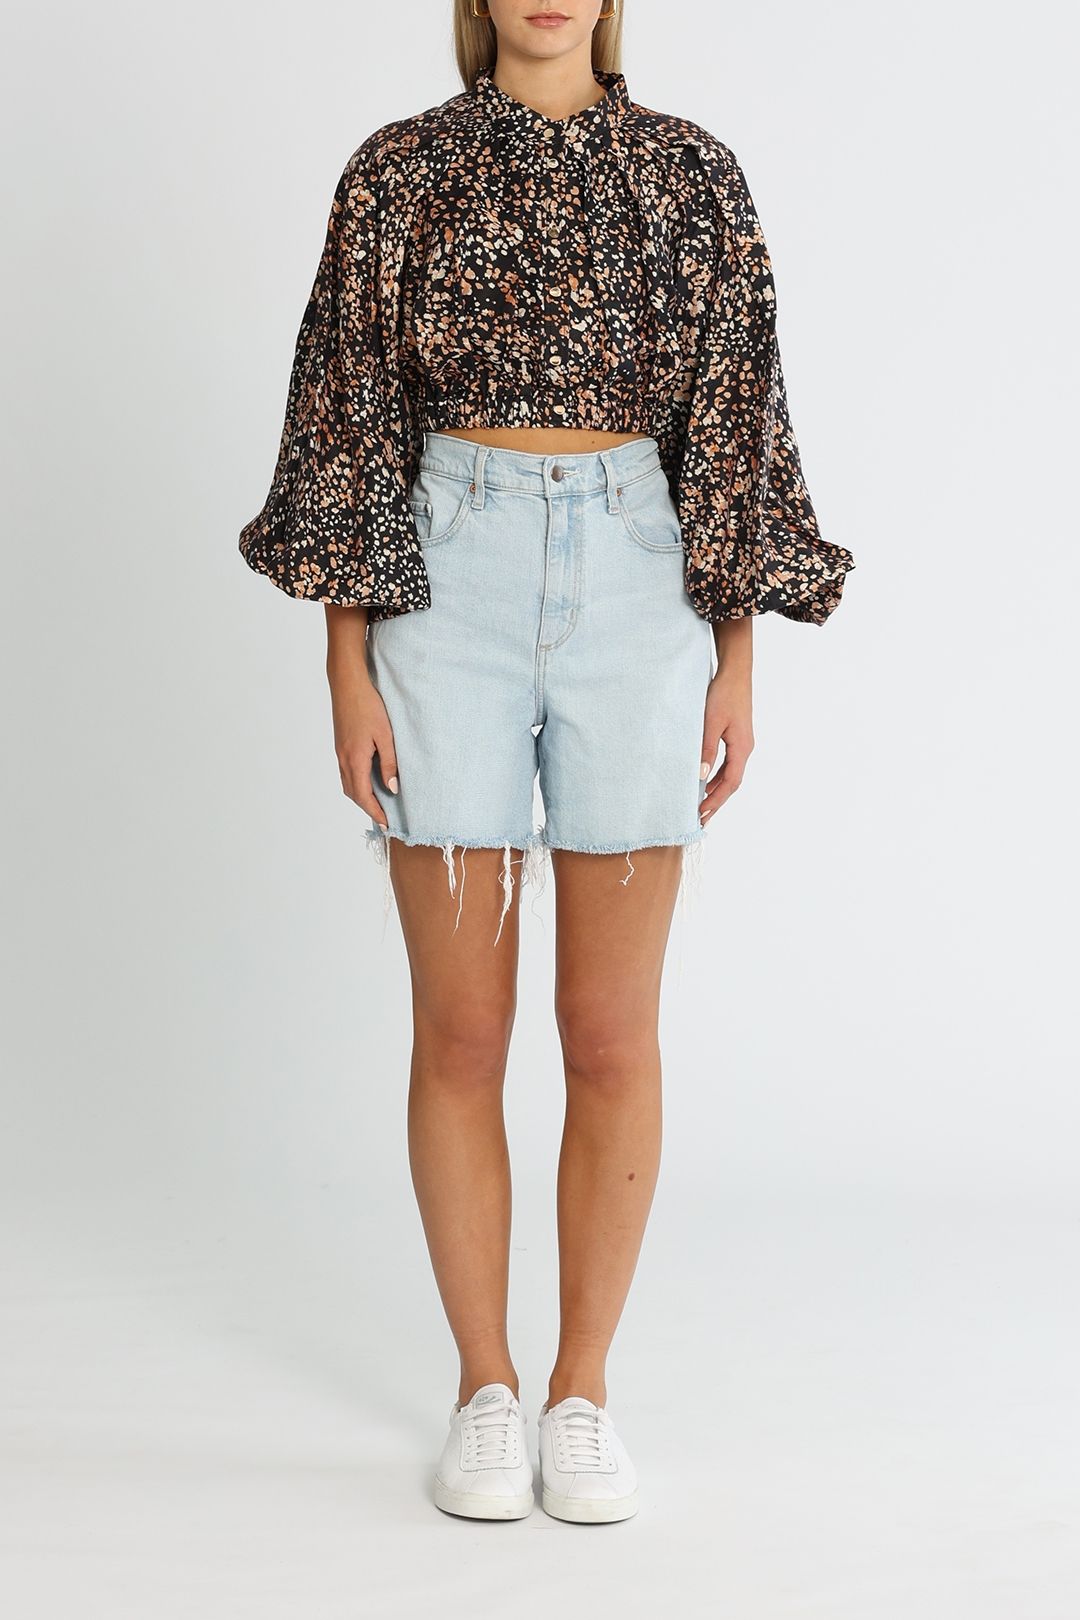 Acler Winrose Top Wild Spot Cropped